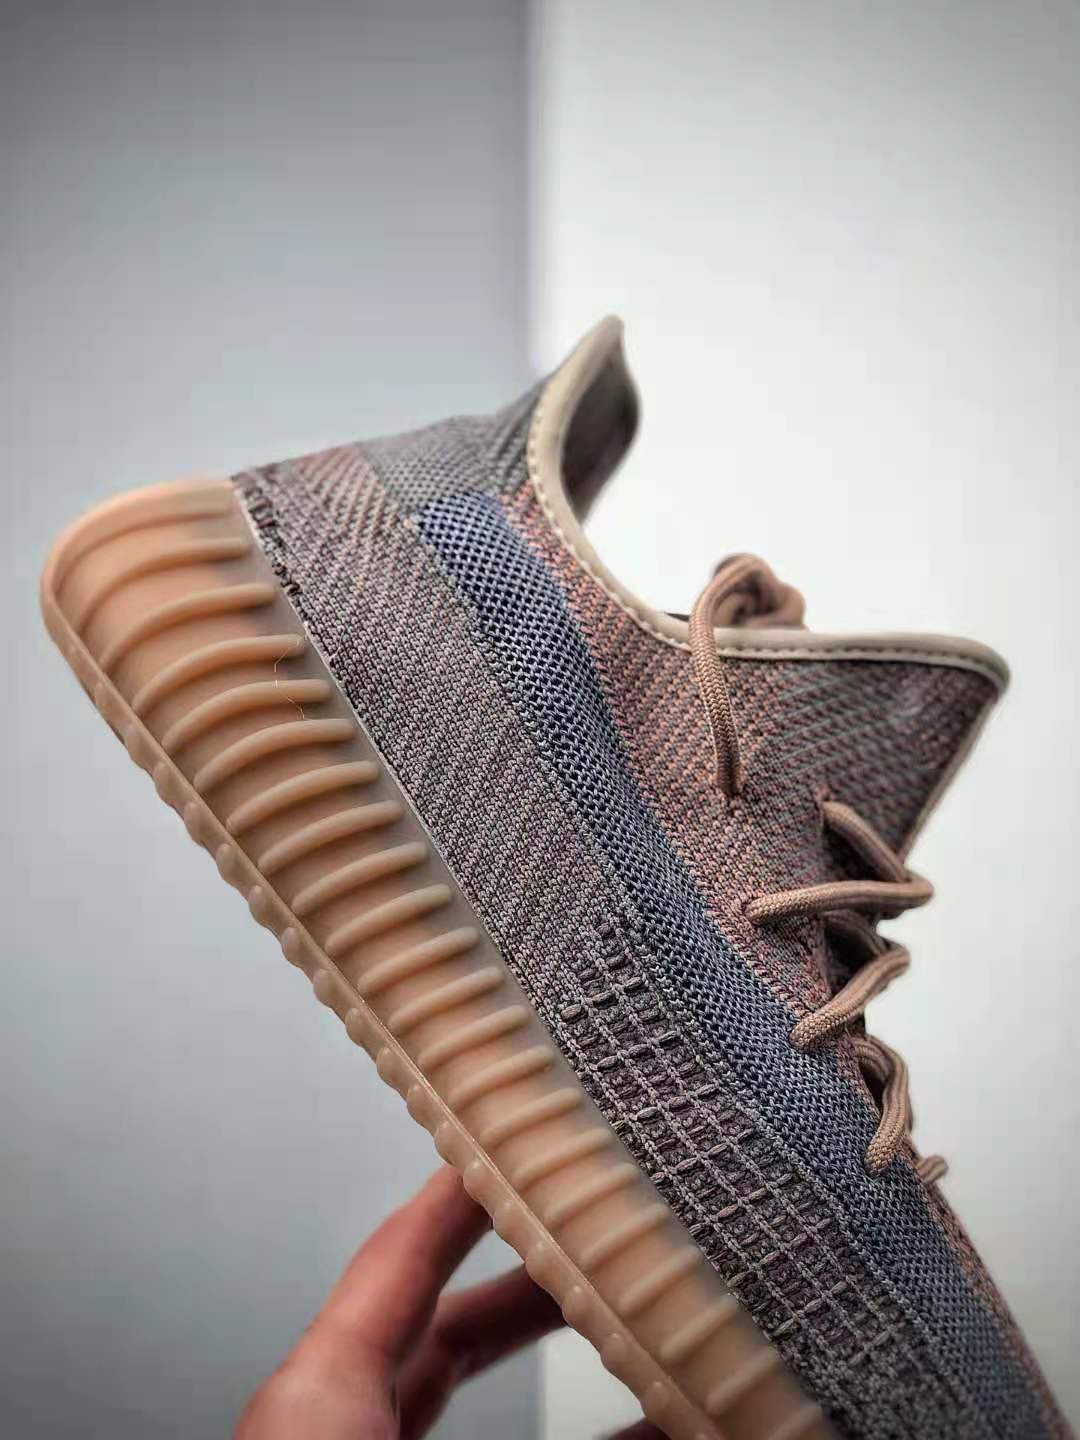 Adidas Yeezy Boost 350 V2 'Fade' H02795 - Exquisite Design & Unmatched Comfort